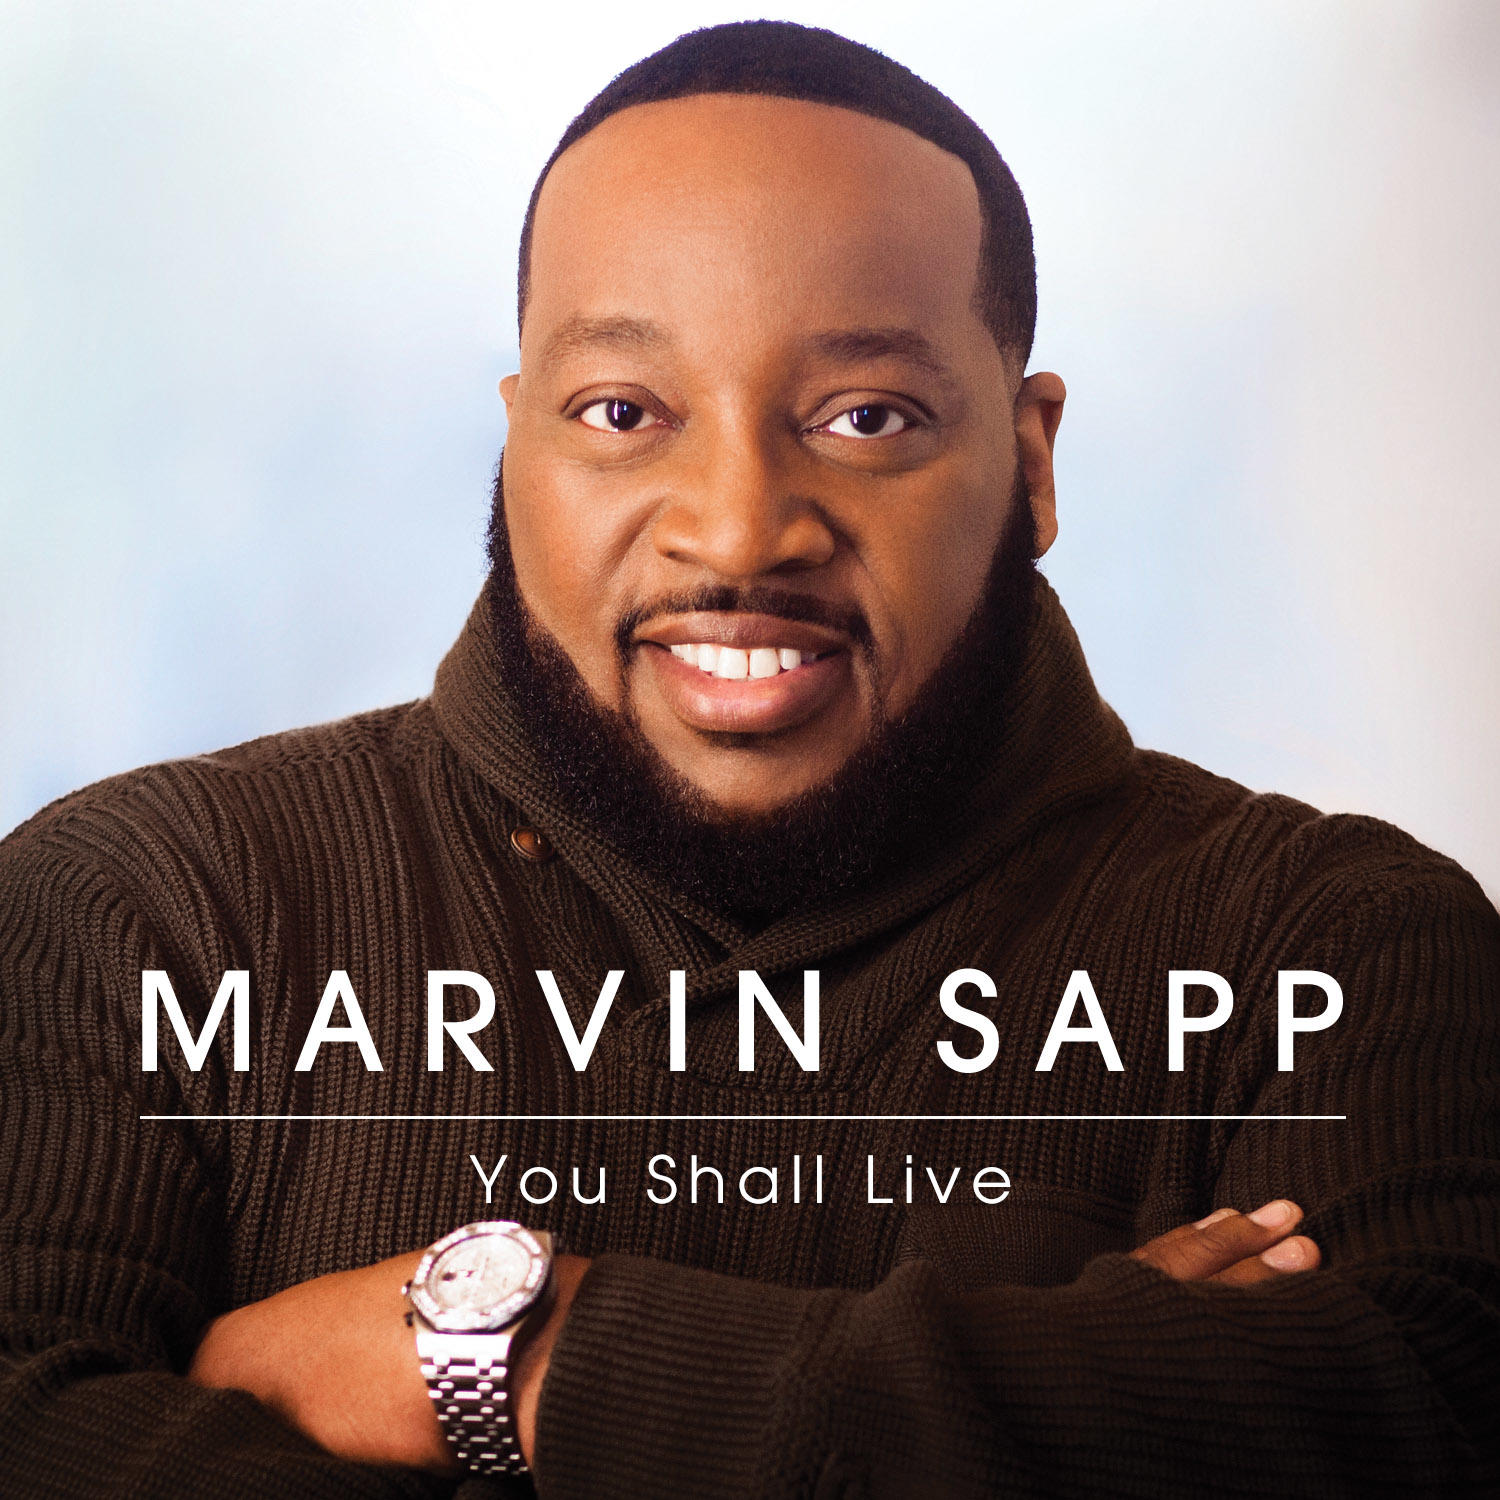 First Look At New Marvin Sapp Album Cover [PHOTO] MyPraise 102.5